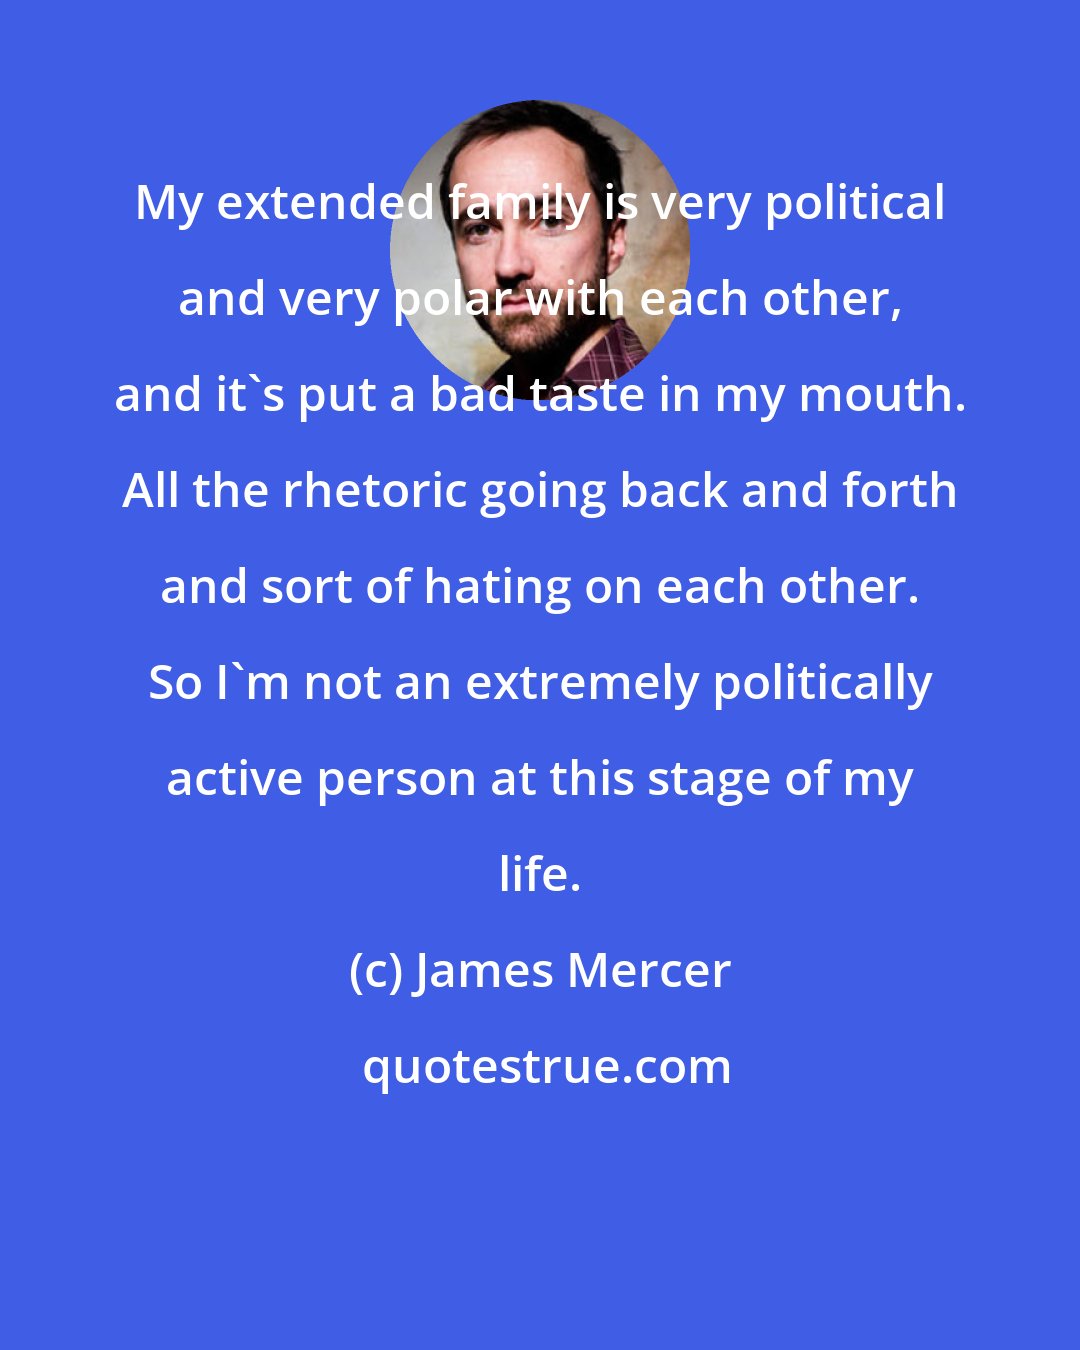 James Mercer: My extended family is very political and very polar with each other, and it's put a bad taste in my mouth. All the rhetoric going back and forth and sort of hating on each other. So I'm not an extremely politically active person at this stage of my life.